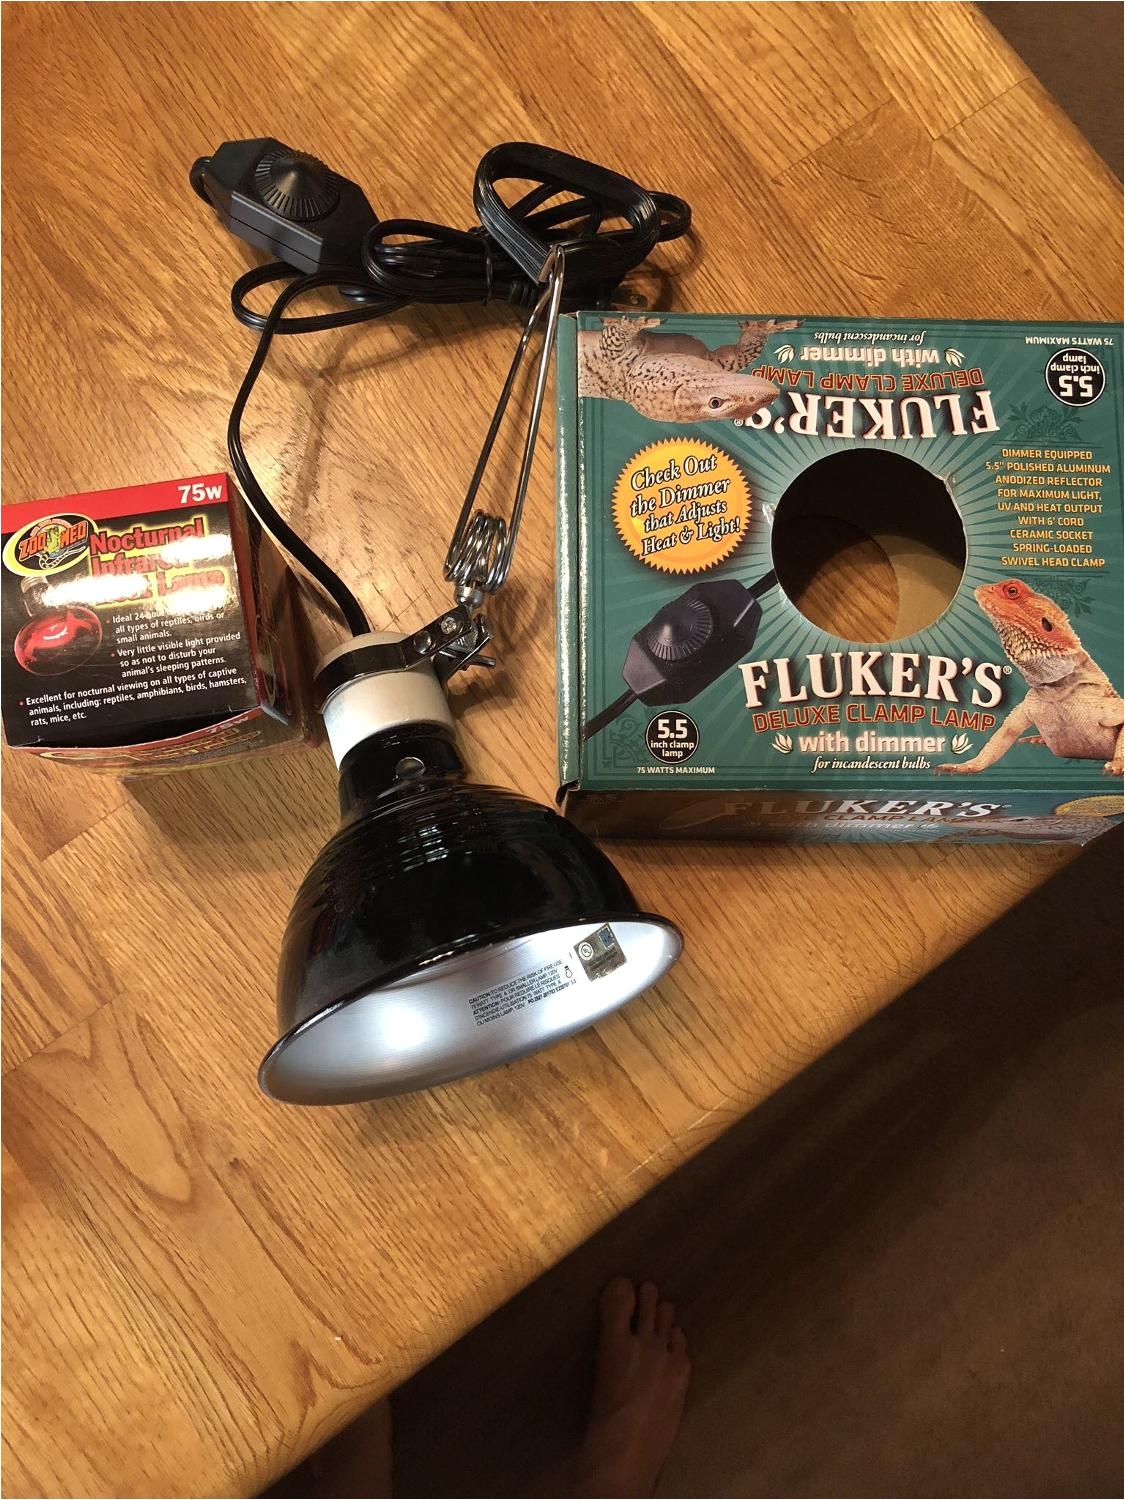 find more flukers deluxe clamp lamp with dimmer 5 5 new in box never used will include 75w night heat bulb for sale at up to 90 off